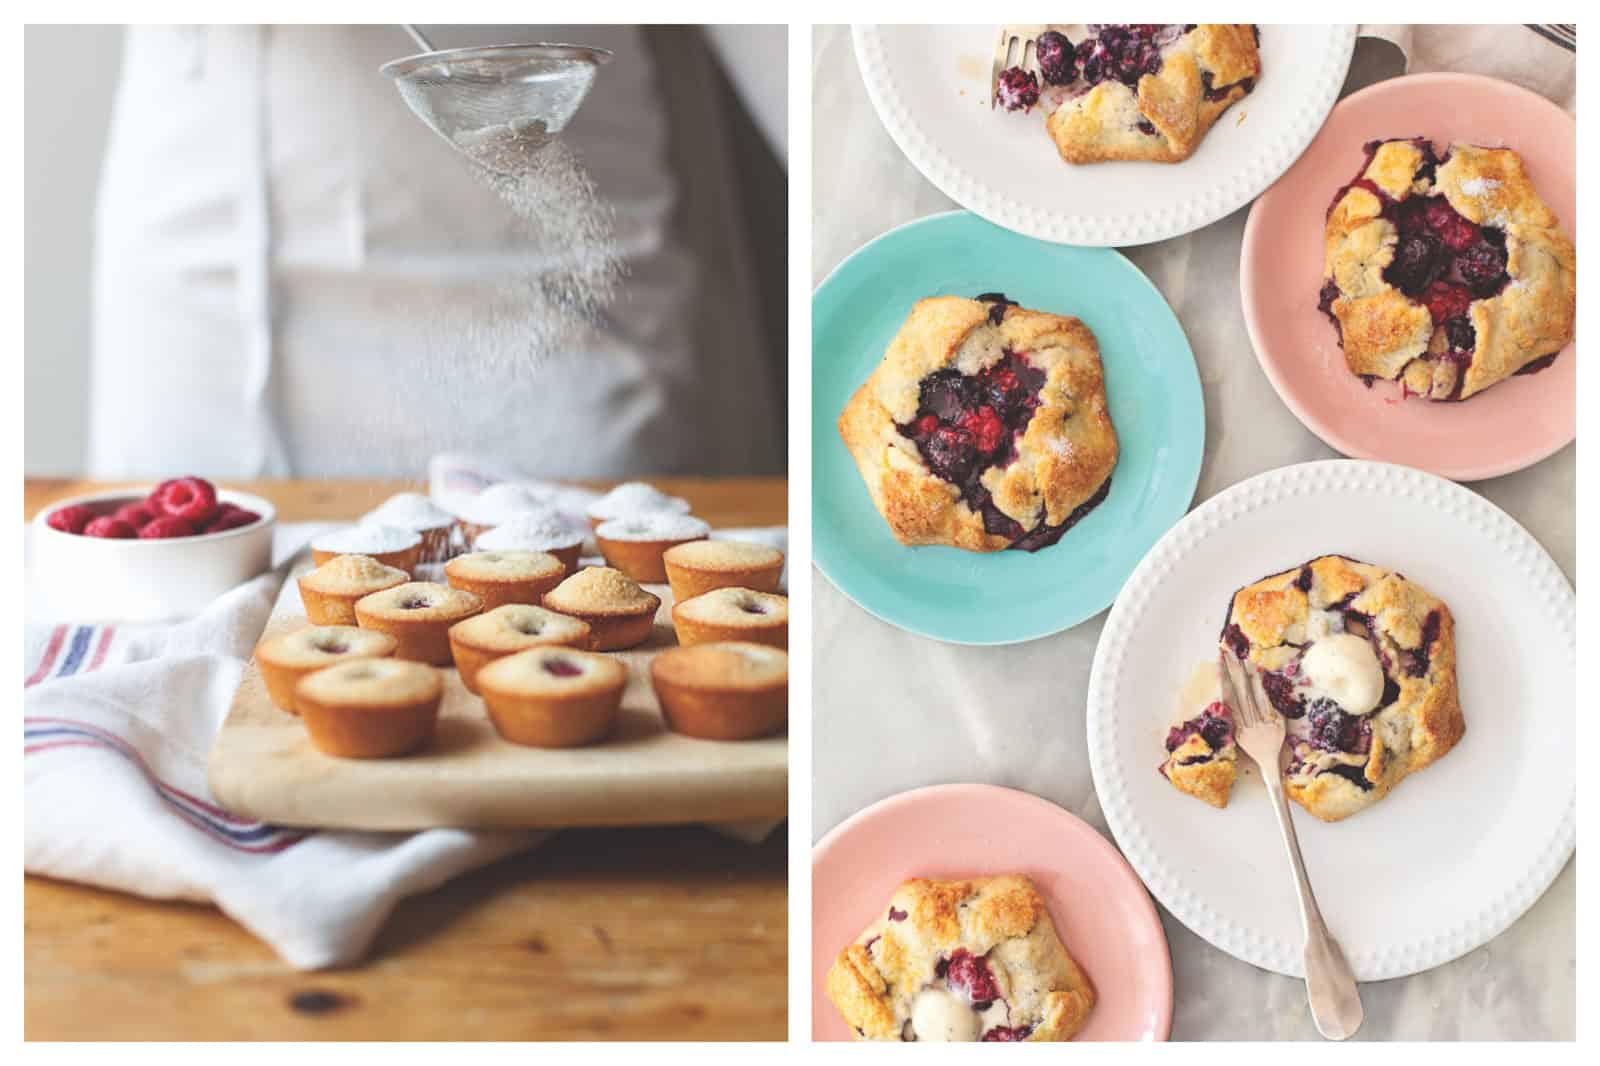 Sugar-dusted Financiers pastries (left) and mixed berry tarts (right) by Mardi Michels in her French cookbook 'In the French Kitchen with Kids'.